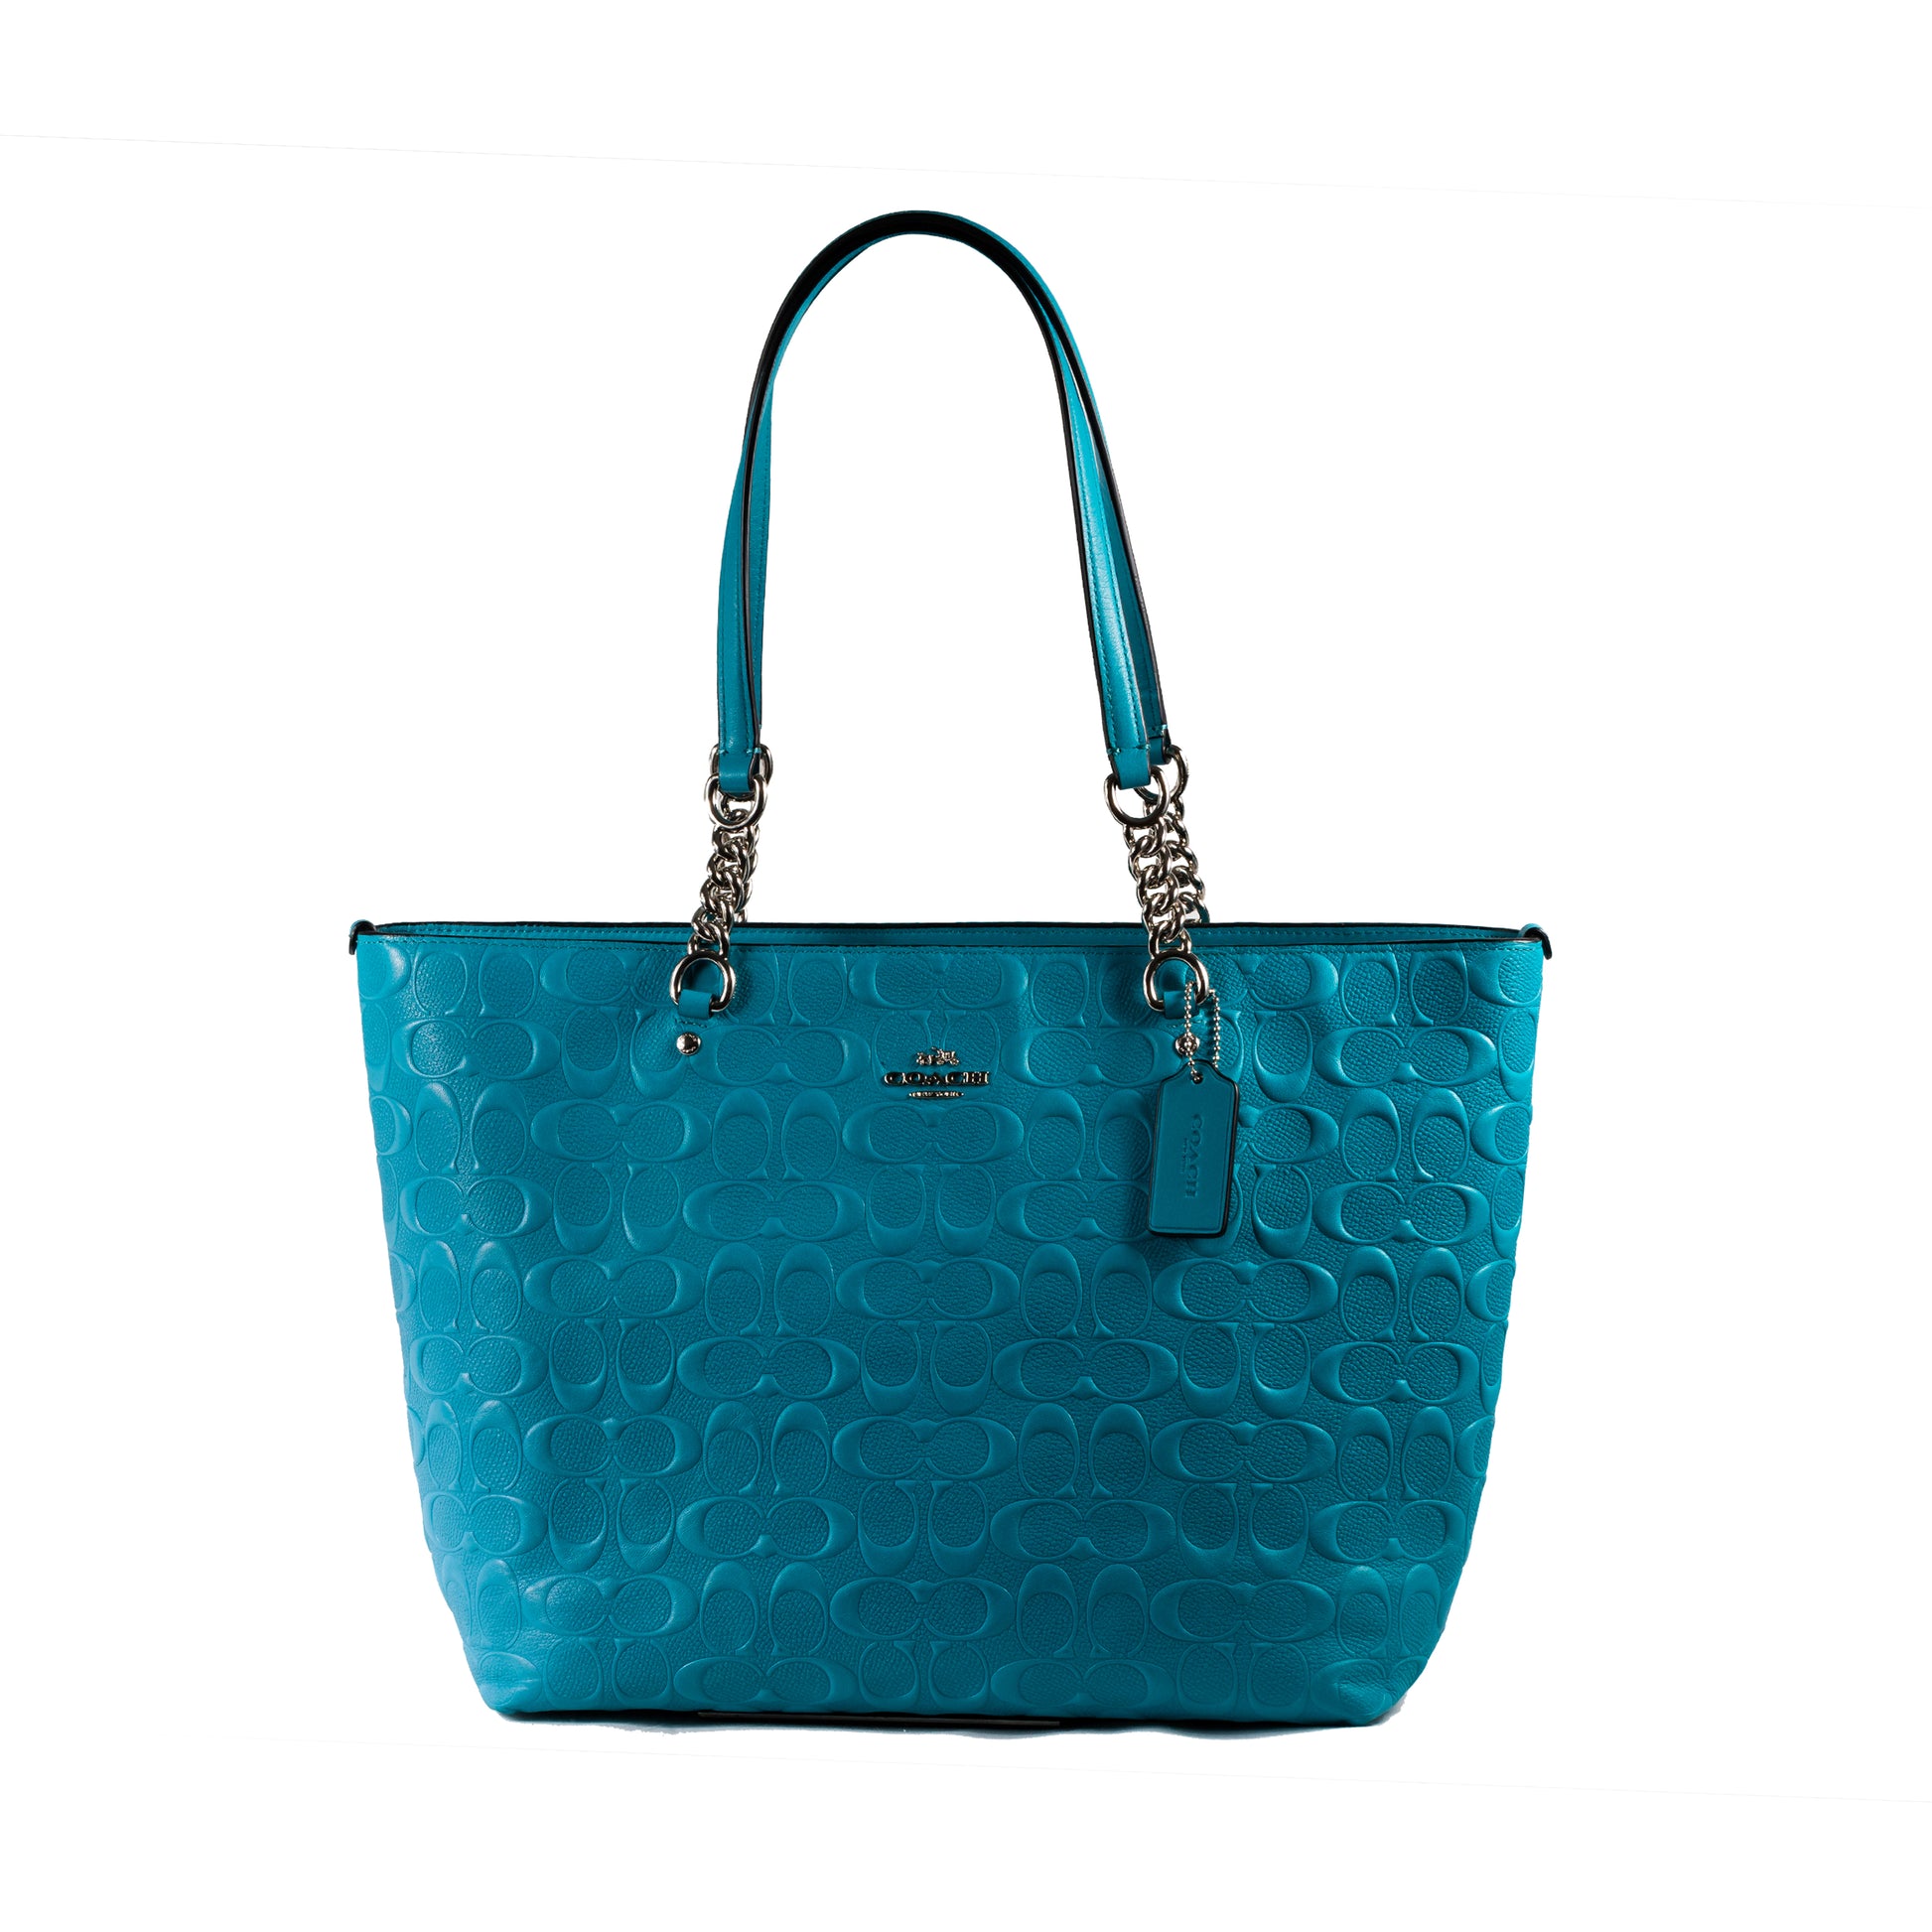 Coach Embroidered Signature Sophia Turquoise Tote Large-sized Tote Embroidered Coach Logo Chain Strap Silver Hardware Interior Zipper Pocket Interior Slip-in Pockets Turquoise Color Tote